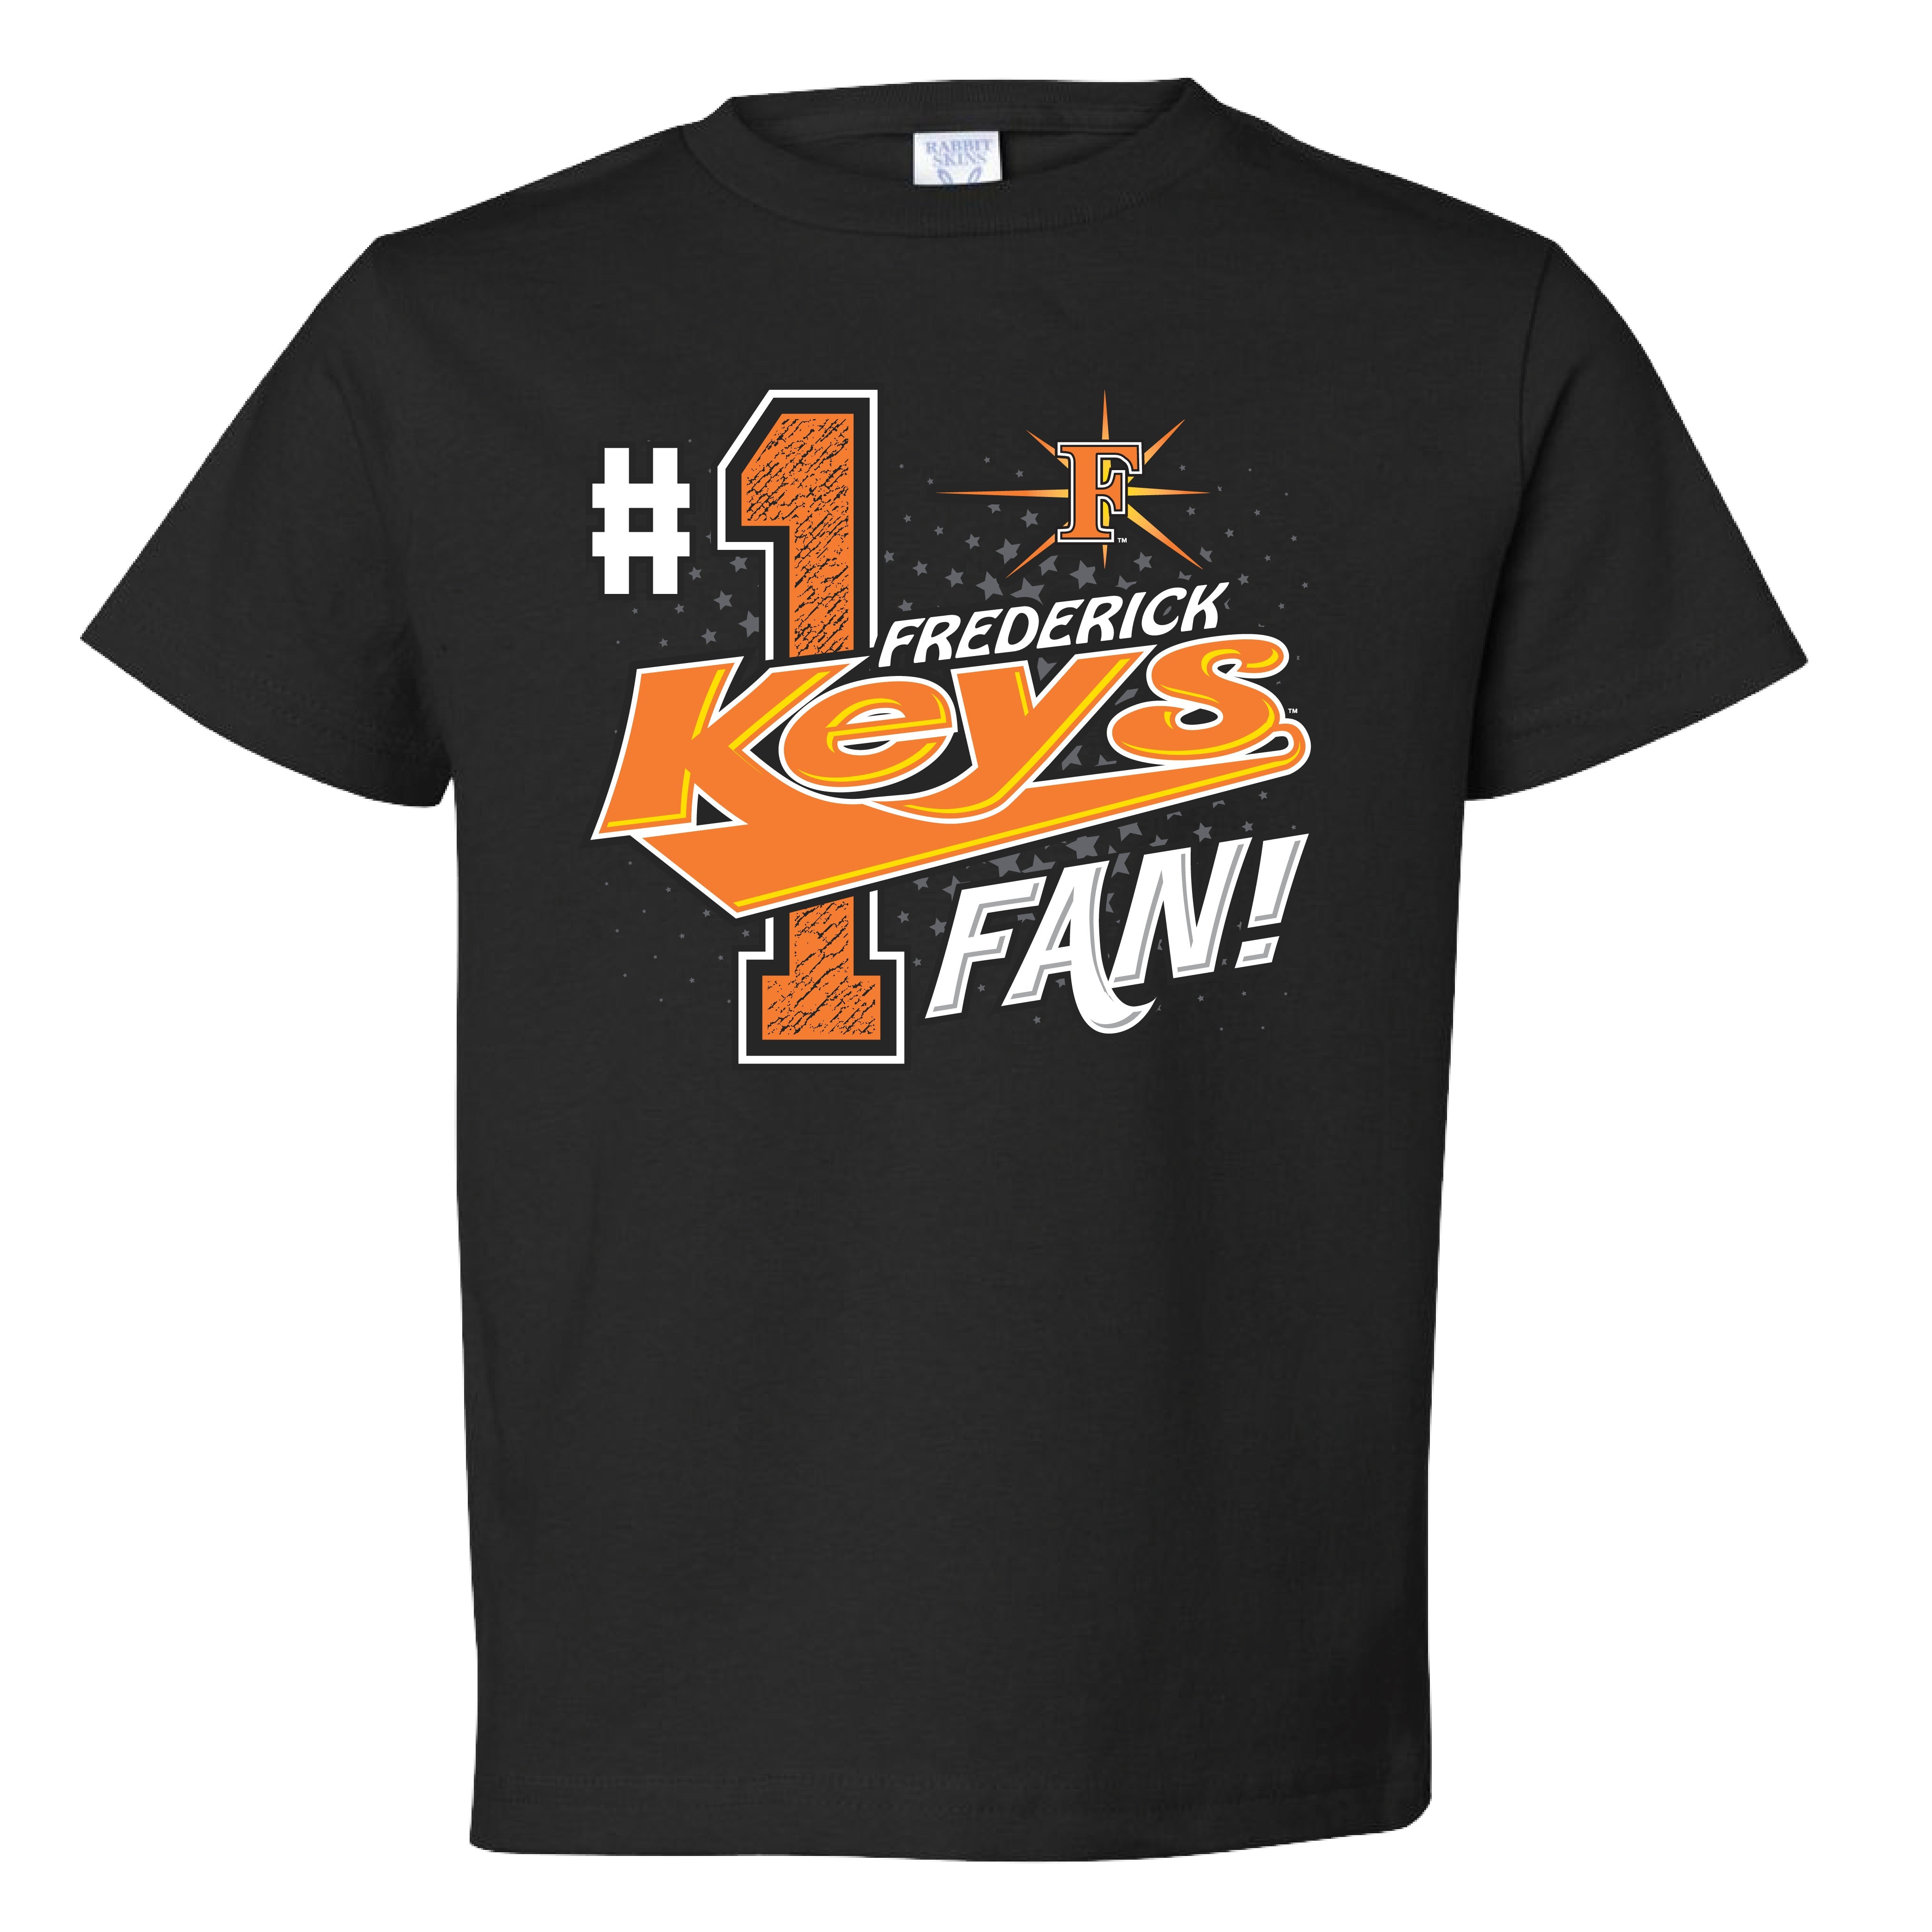 Frederick Keys Stand Toddler Tee-0